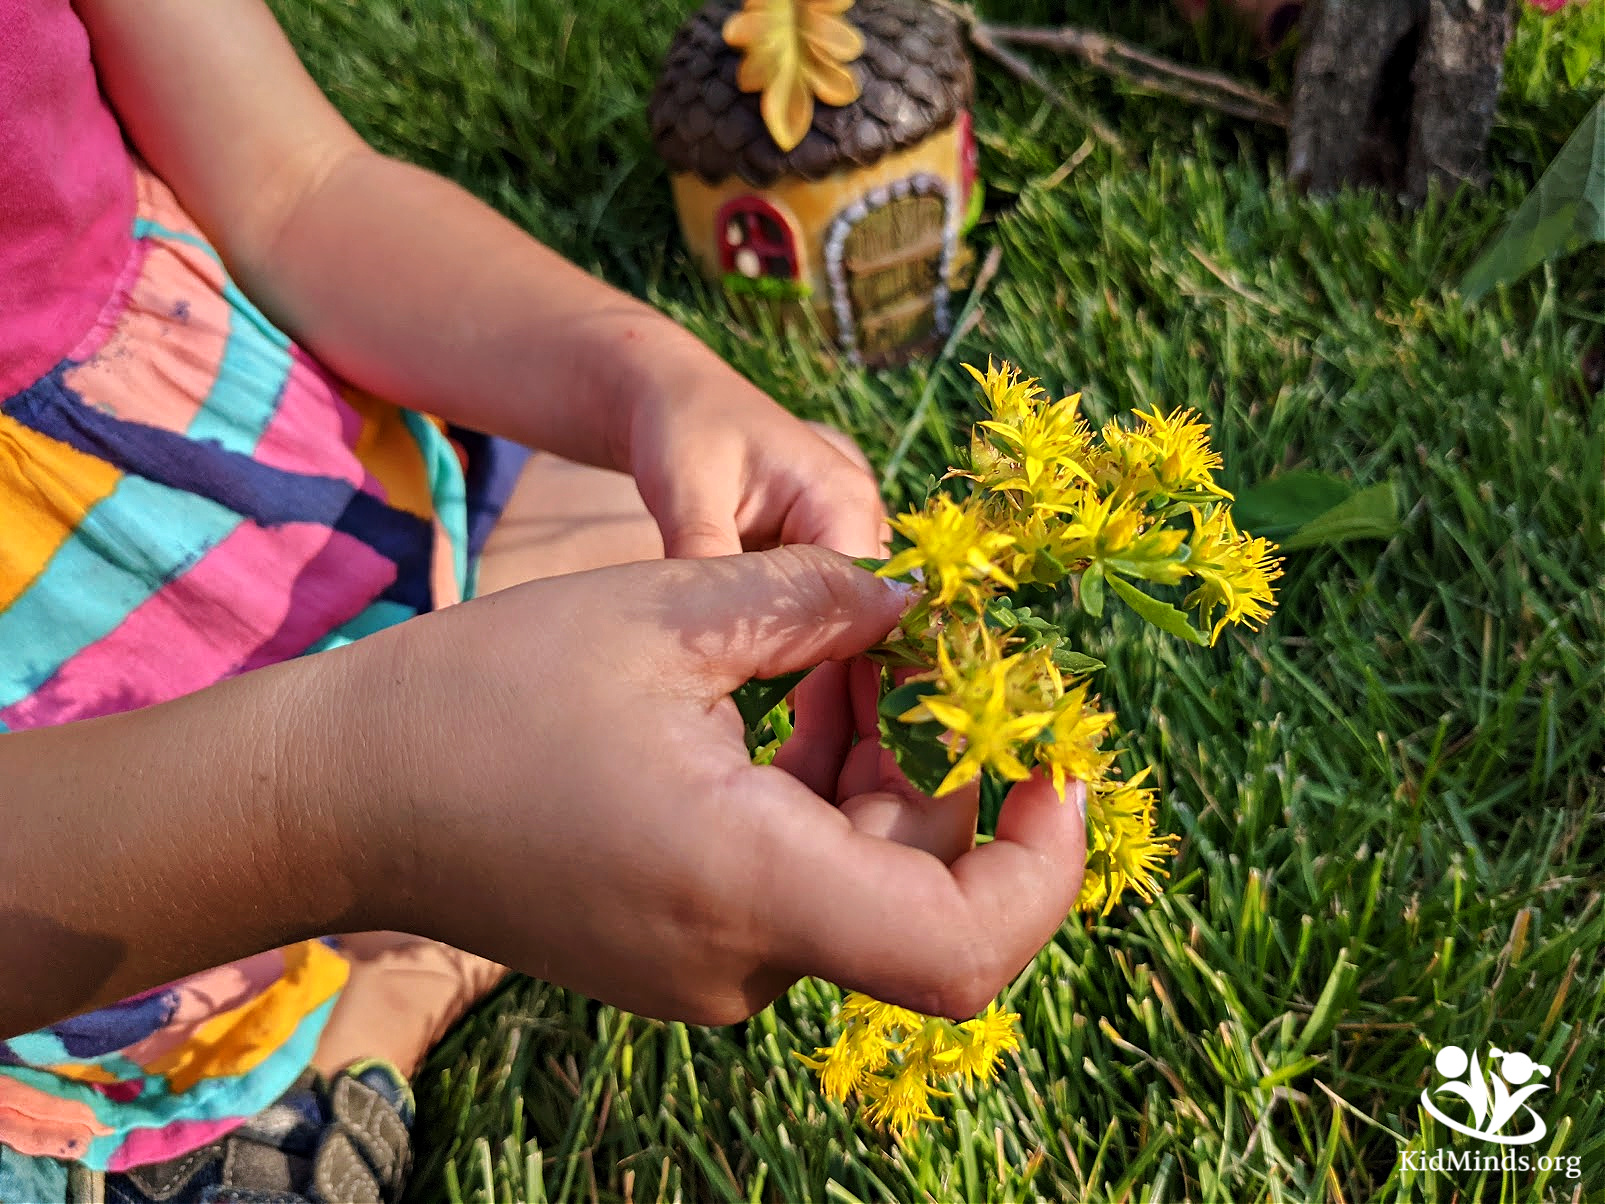 Putting together a fairy garden is not just fun! It incorporates science, technology, engineering, and math (STEM) learning. #kidsactivities #fairygarden #STEMlearning #playandlearn